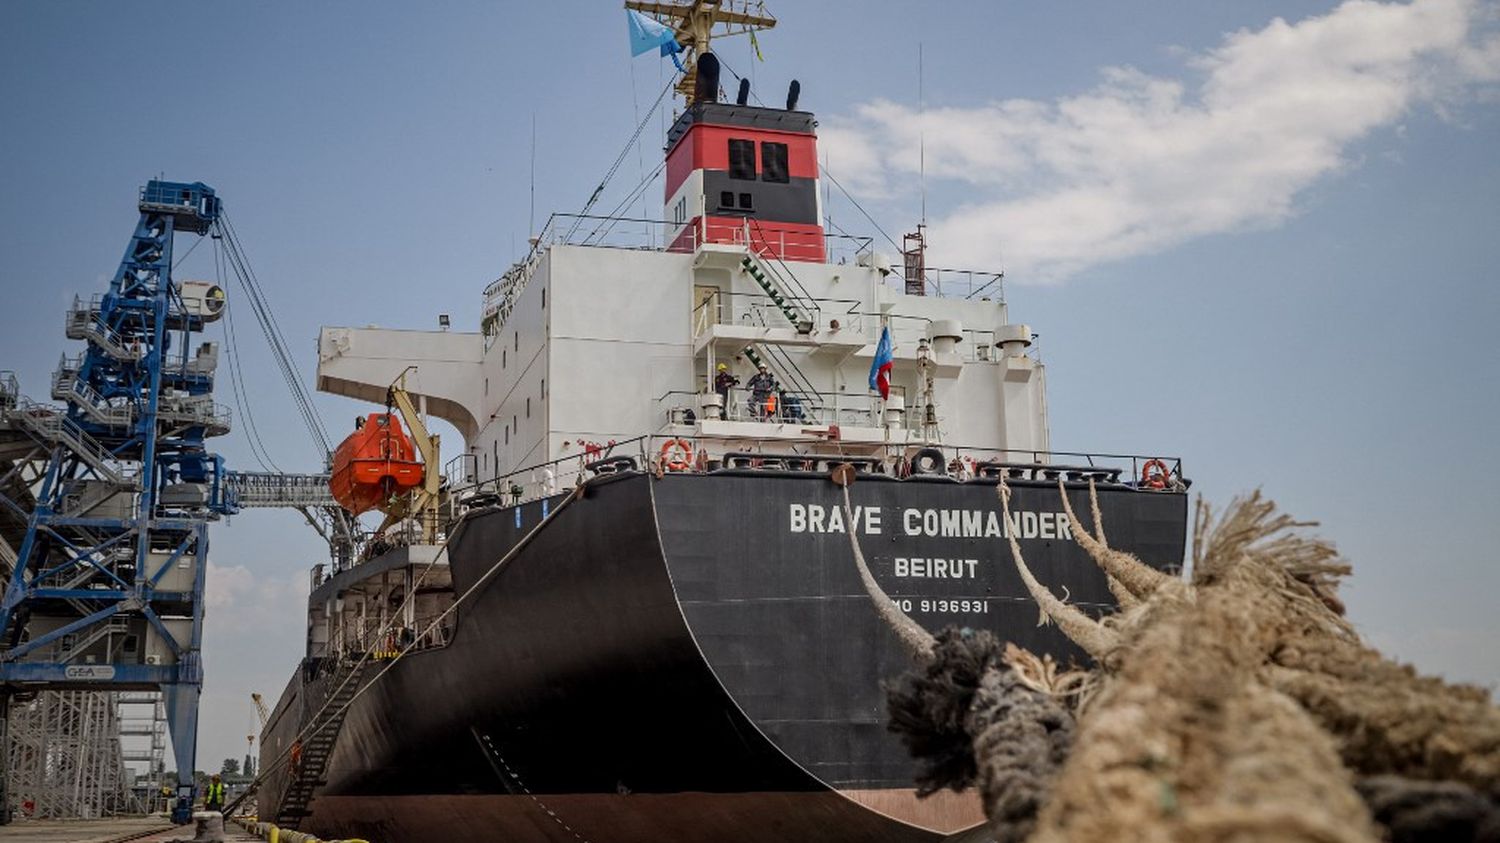 War in Ukraine: a first UN ship ready to leave the country with cereals
